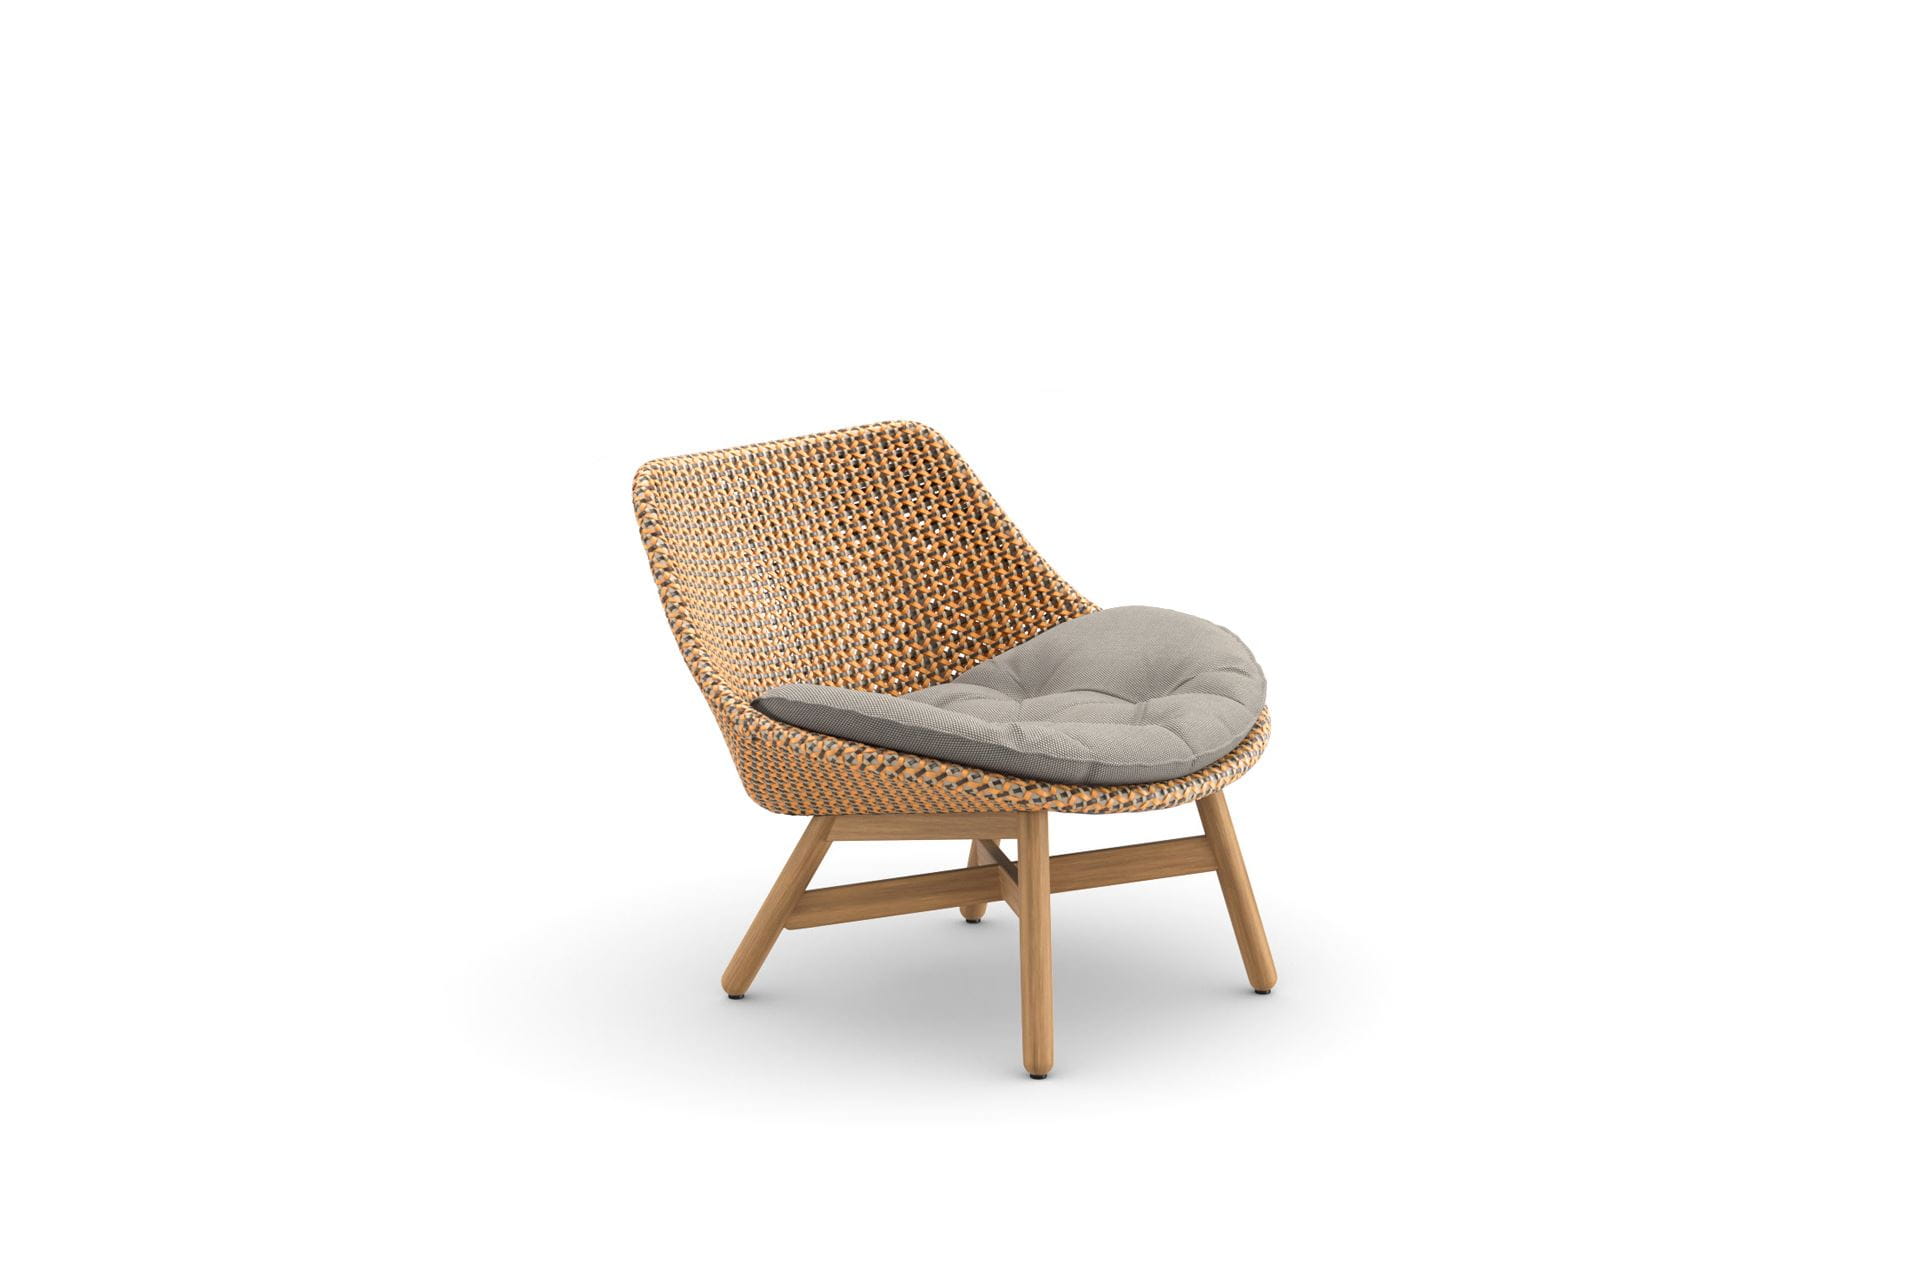 MBRACE Club chair in color Seville